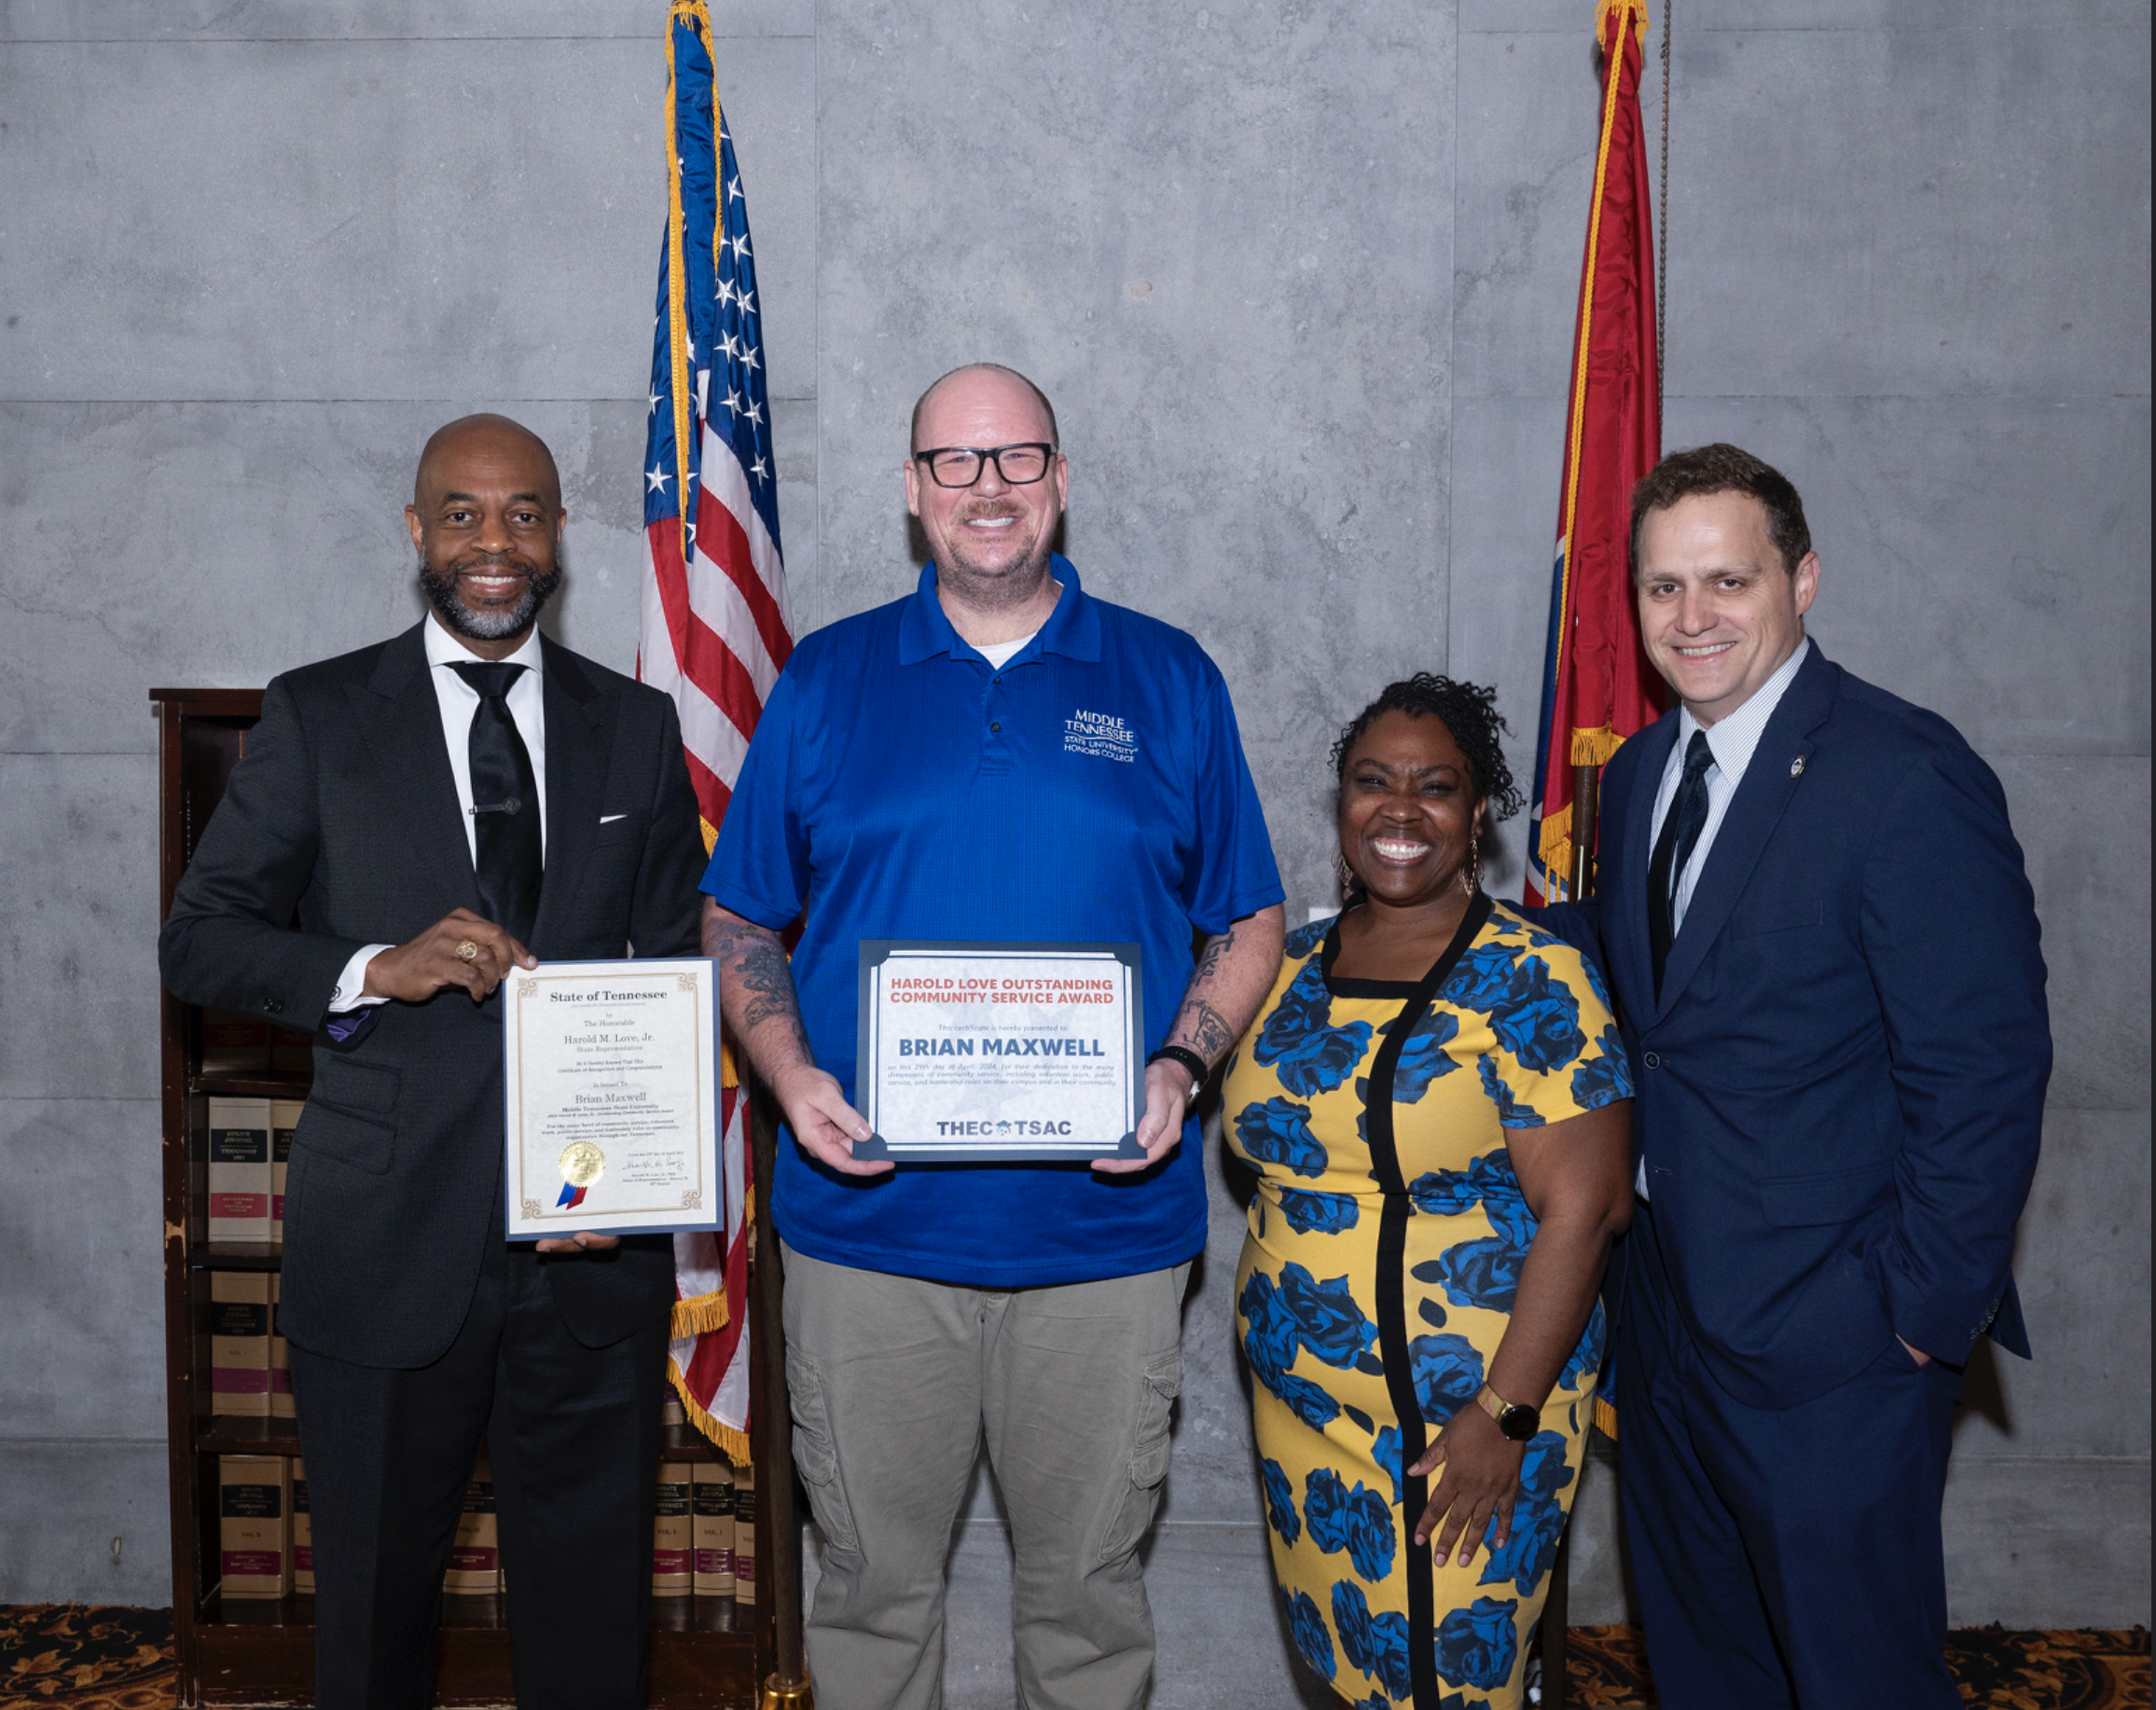 Graduating senior video and film production major Brian Maxwell, second from left, receives his 2024 Harold Love Outstanding Community Service Award April 29 at the Tennessee Capitol in Nashville, Tenn. Presenting the award are, from left, state Rep. Harold Love Jr. of Nashville, Tennessee Higher Education Commission Director of HBCU Success Brittany Mosby and THEC Executive Director Steven Gentile.